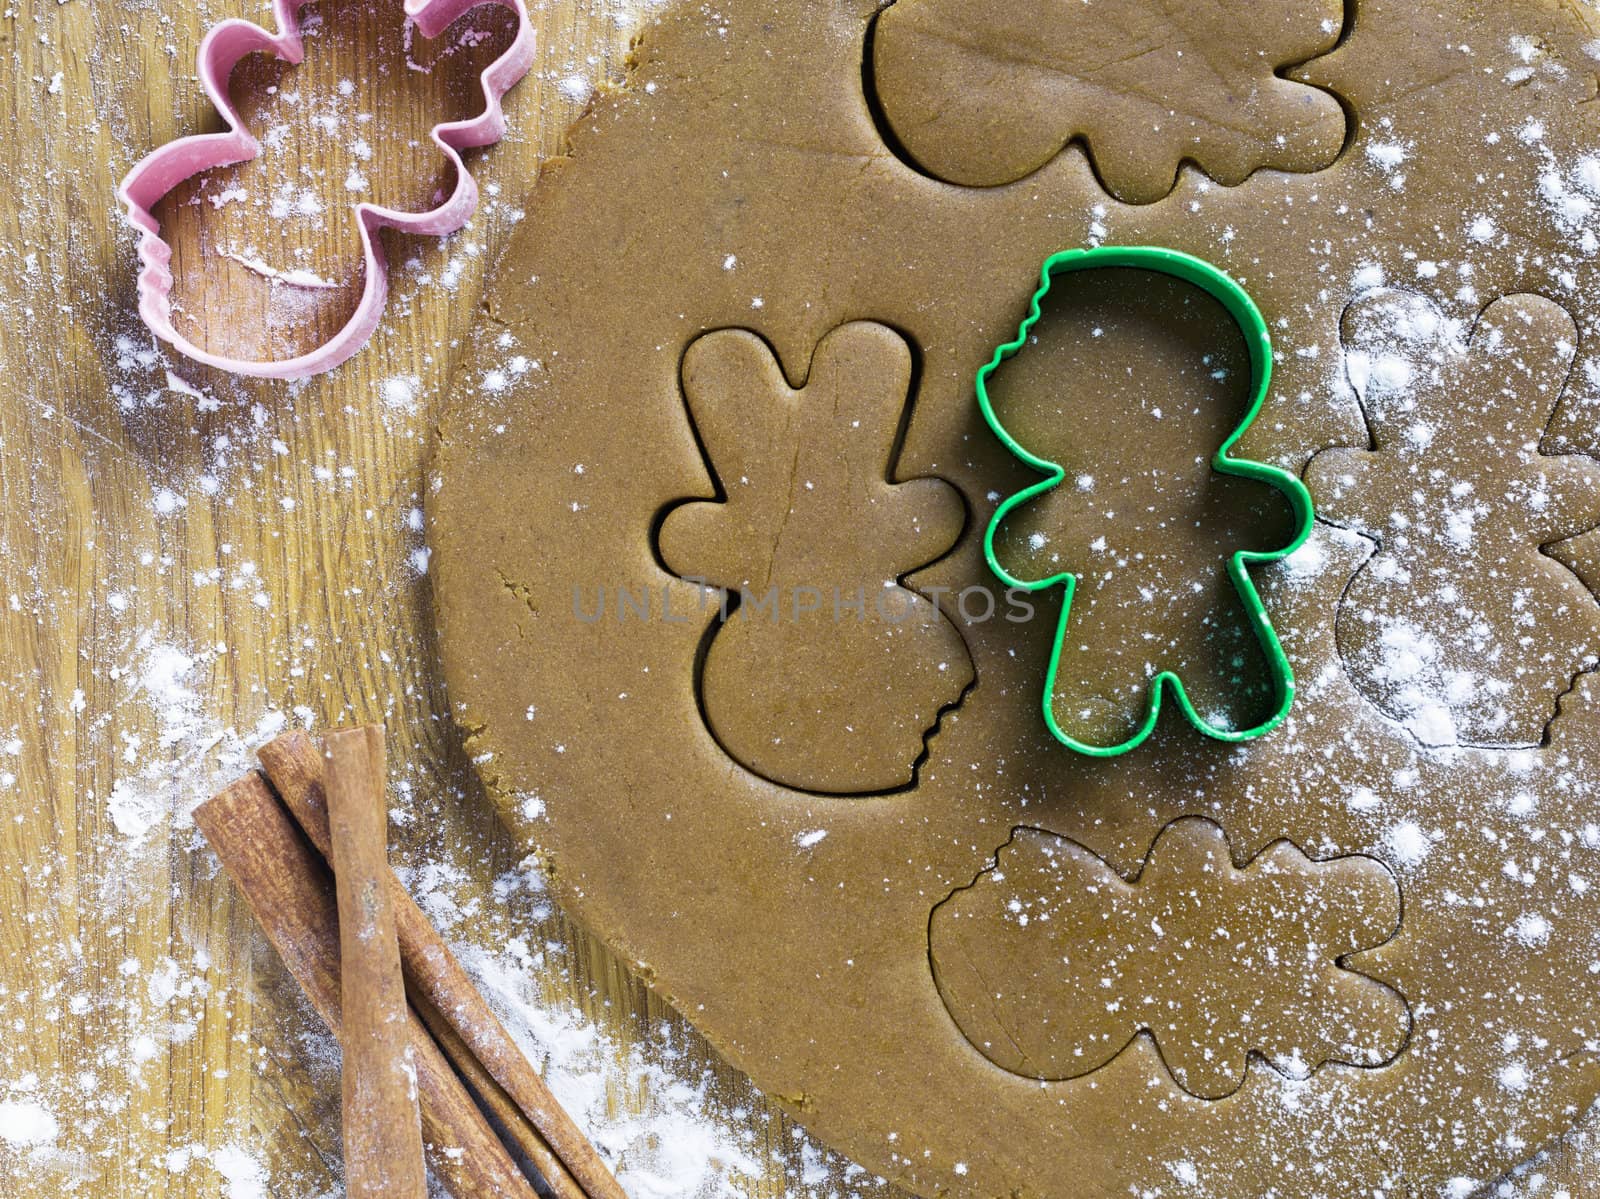 Shape of ginger bread man on dough in a macro image